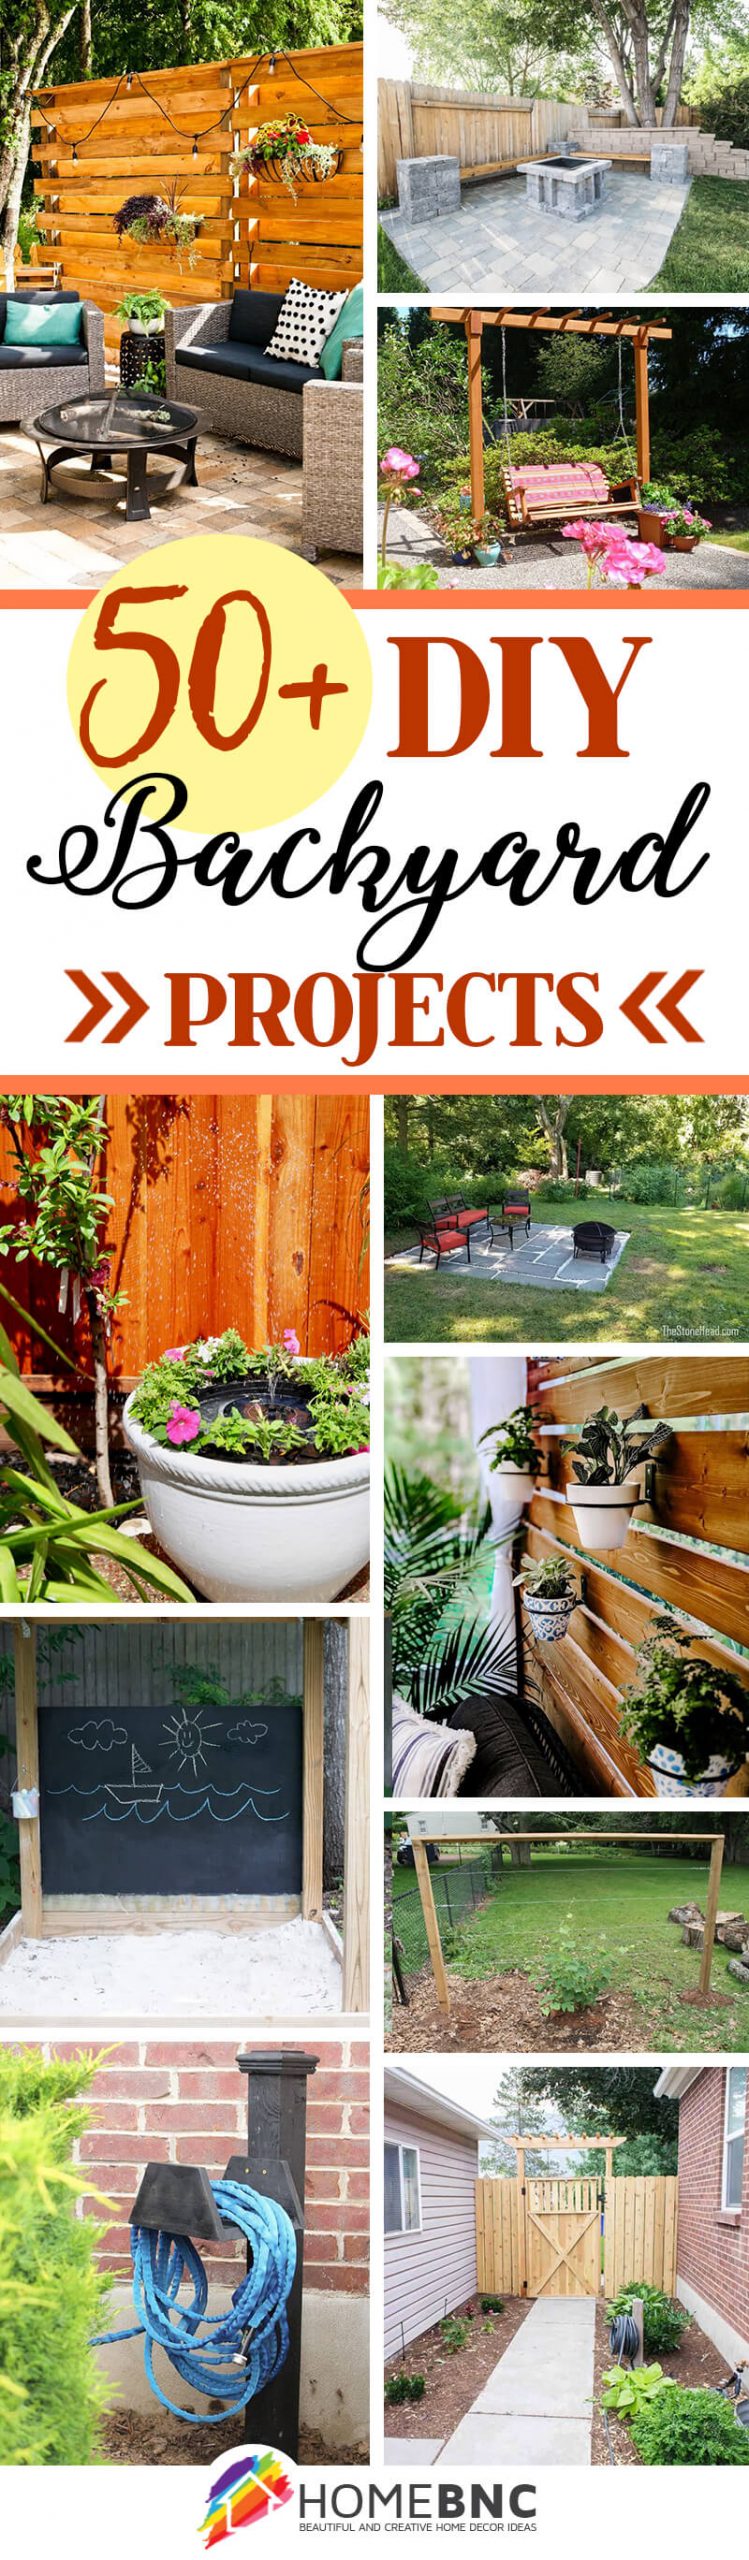 20+ Best DIY Backyard Projects Ideas and Designs for 20